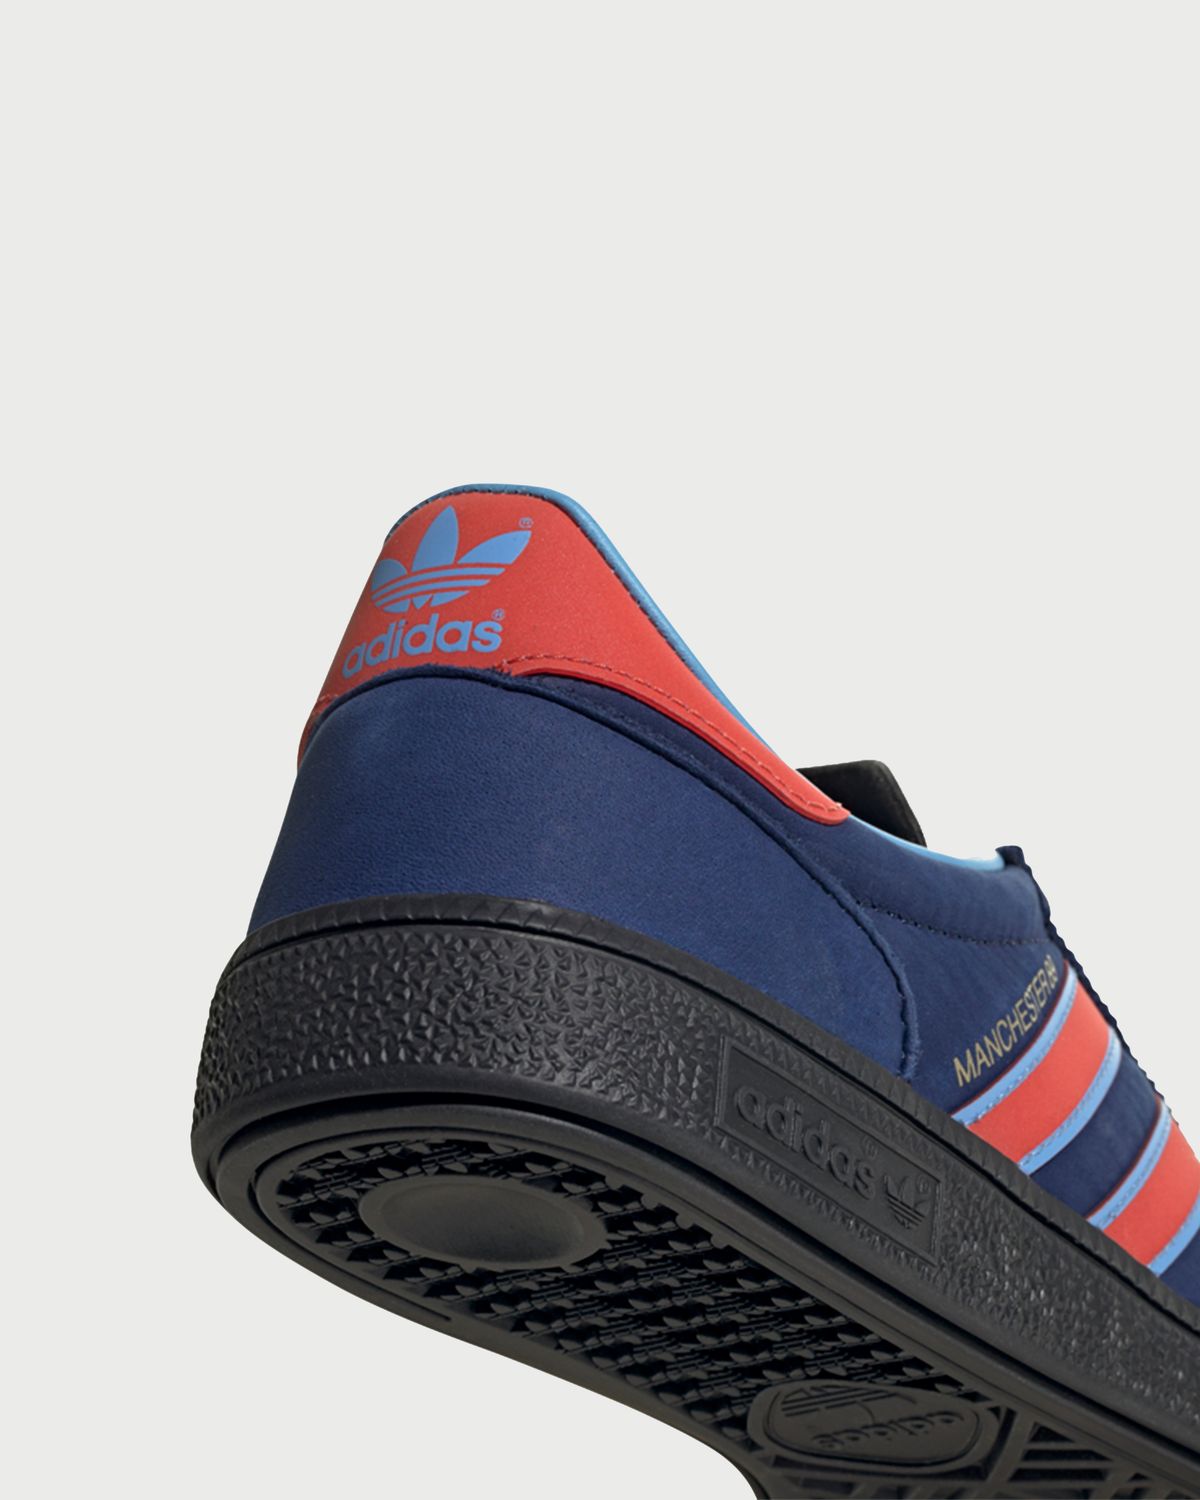 Adidas – Spezial Manchester 89 Trainer Navy - Sneakers - Blue - Image 4